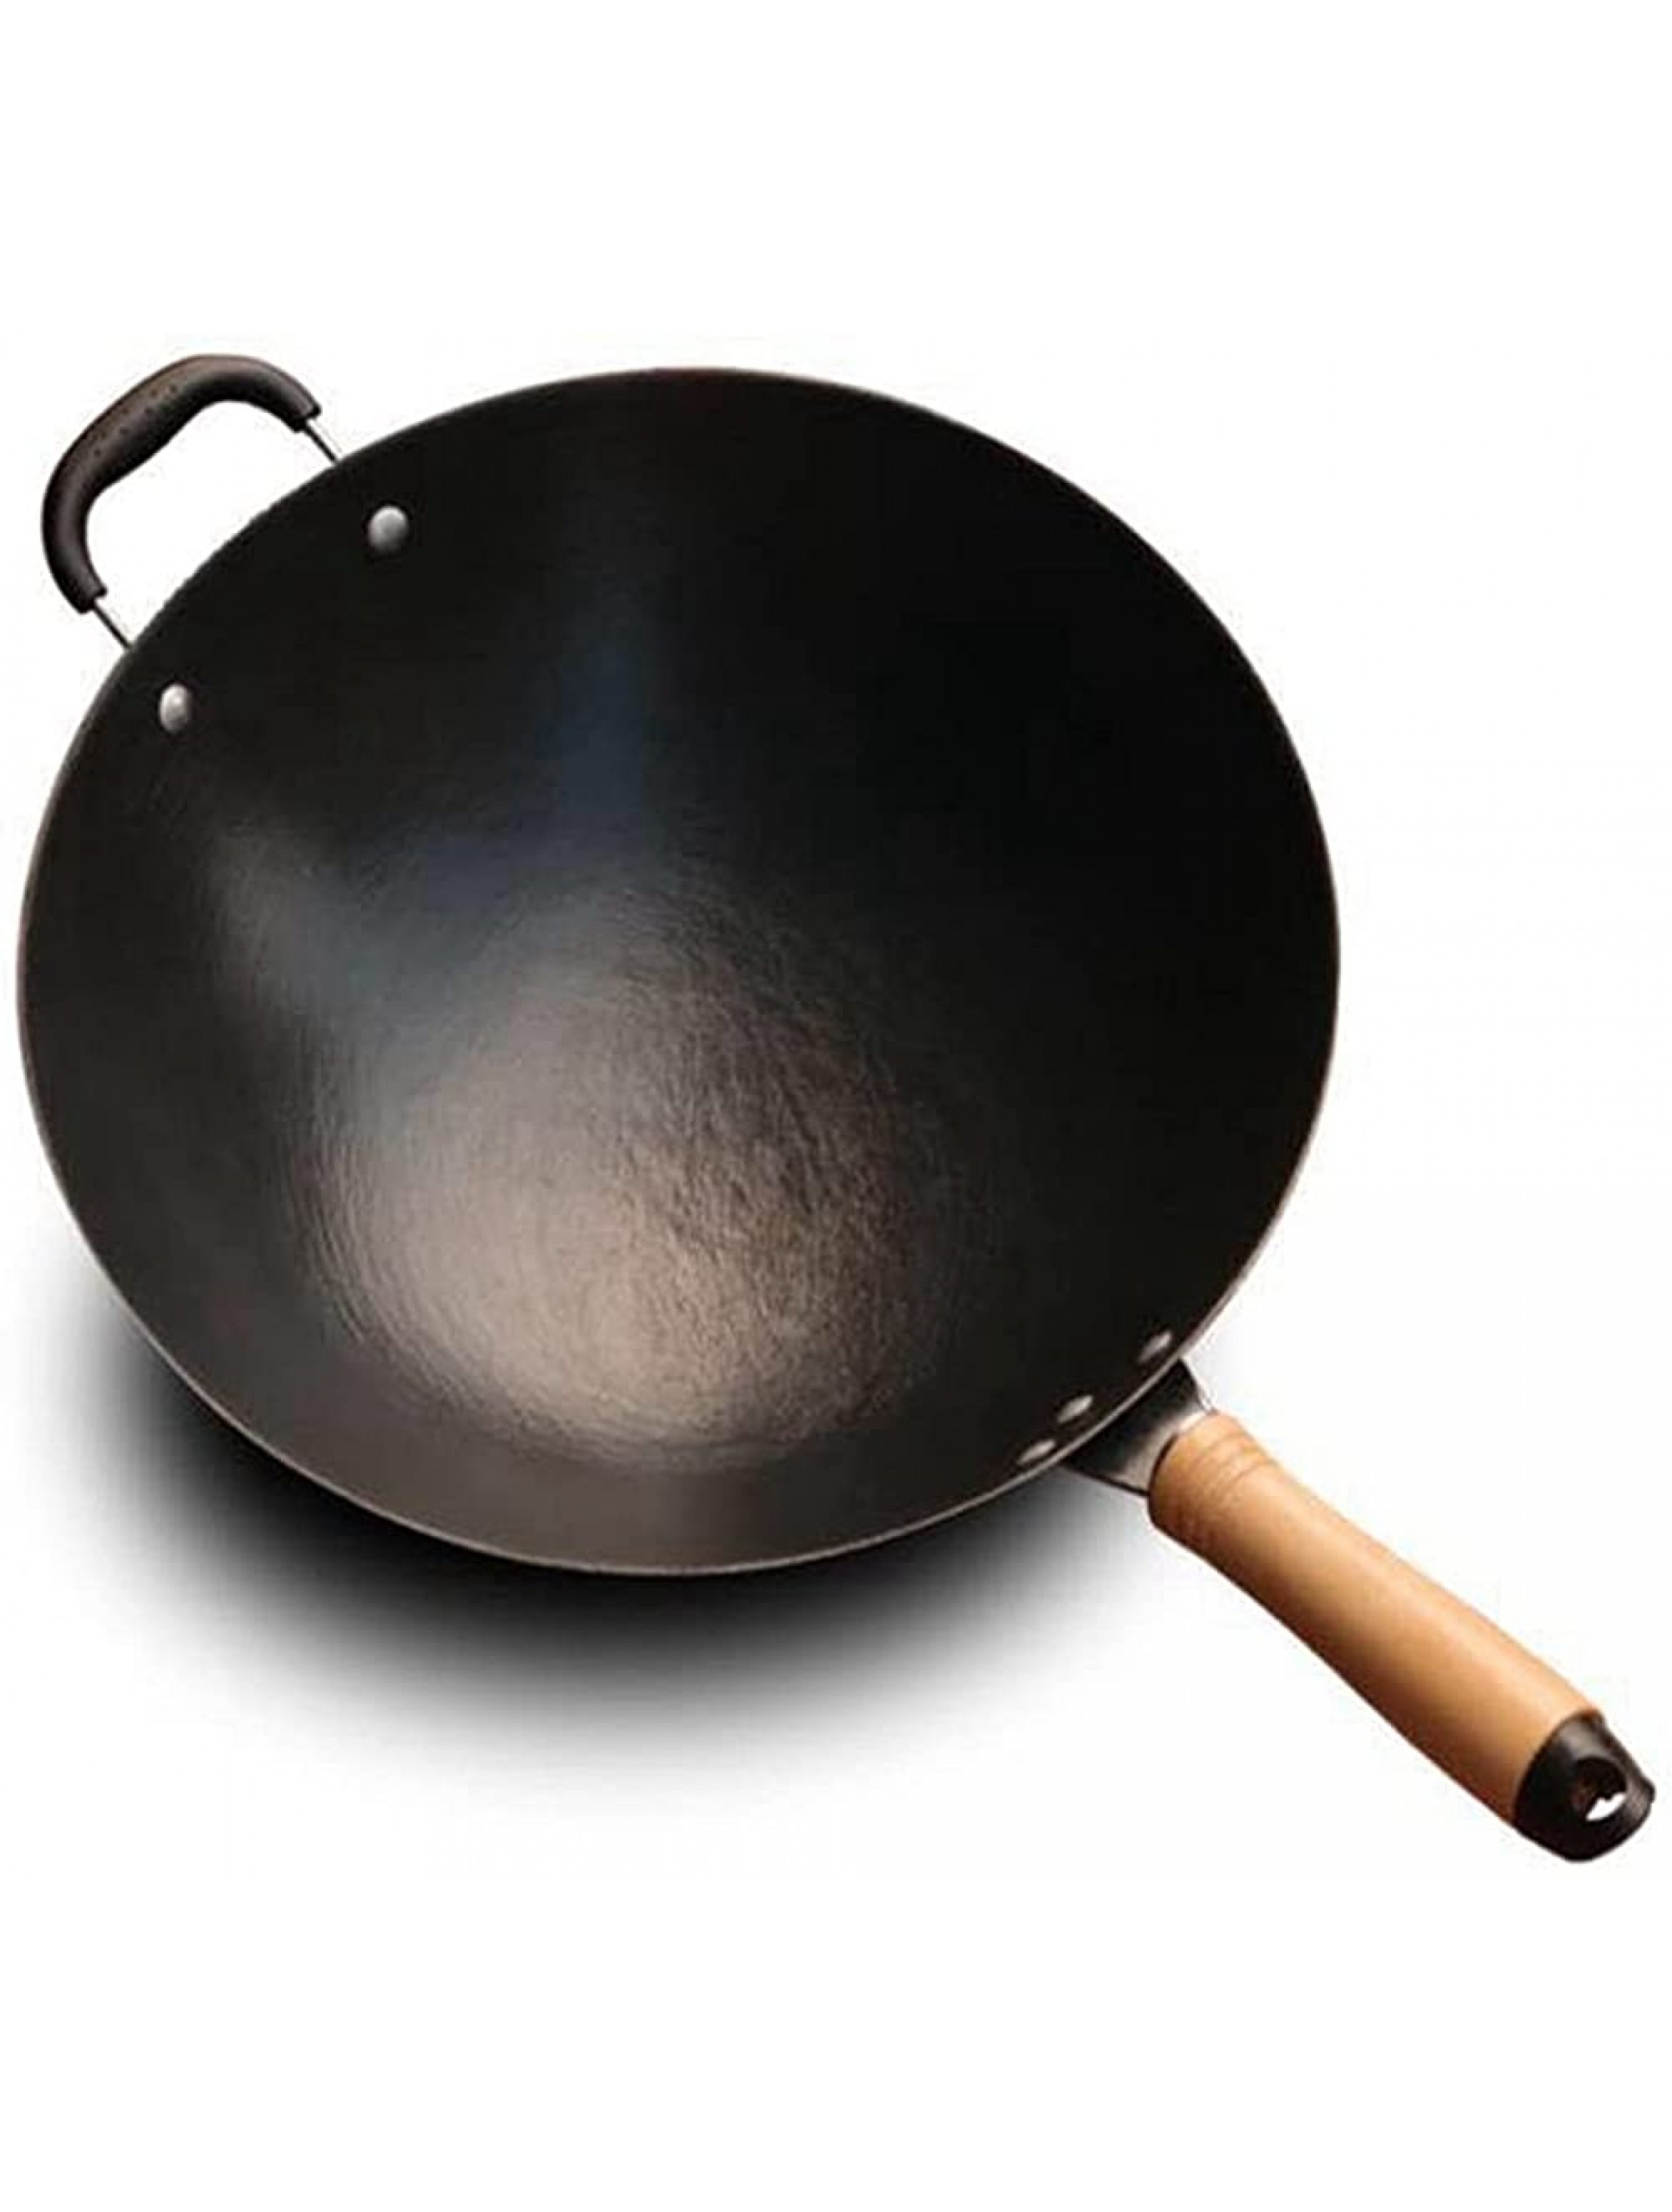 SHUOG Cast Iron Wok Home Uncoated Manual Non-stick Pan Round Bottom Induction Cooker Gas Stove Wok Frying Pan Cooking Non Stick Pan Chef's Pans Color : 32 cm without cover - BSMH39P48